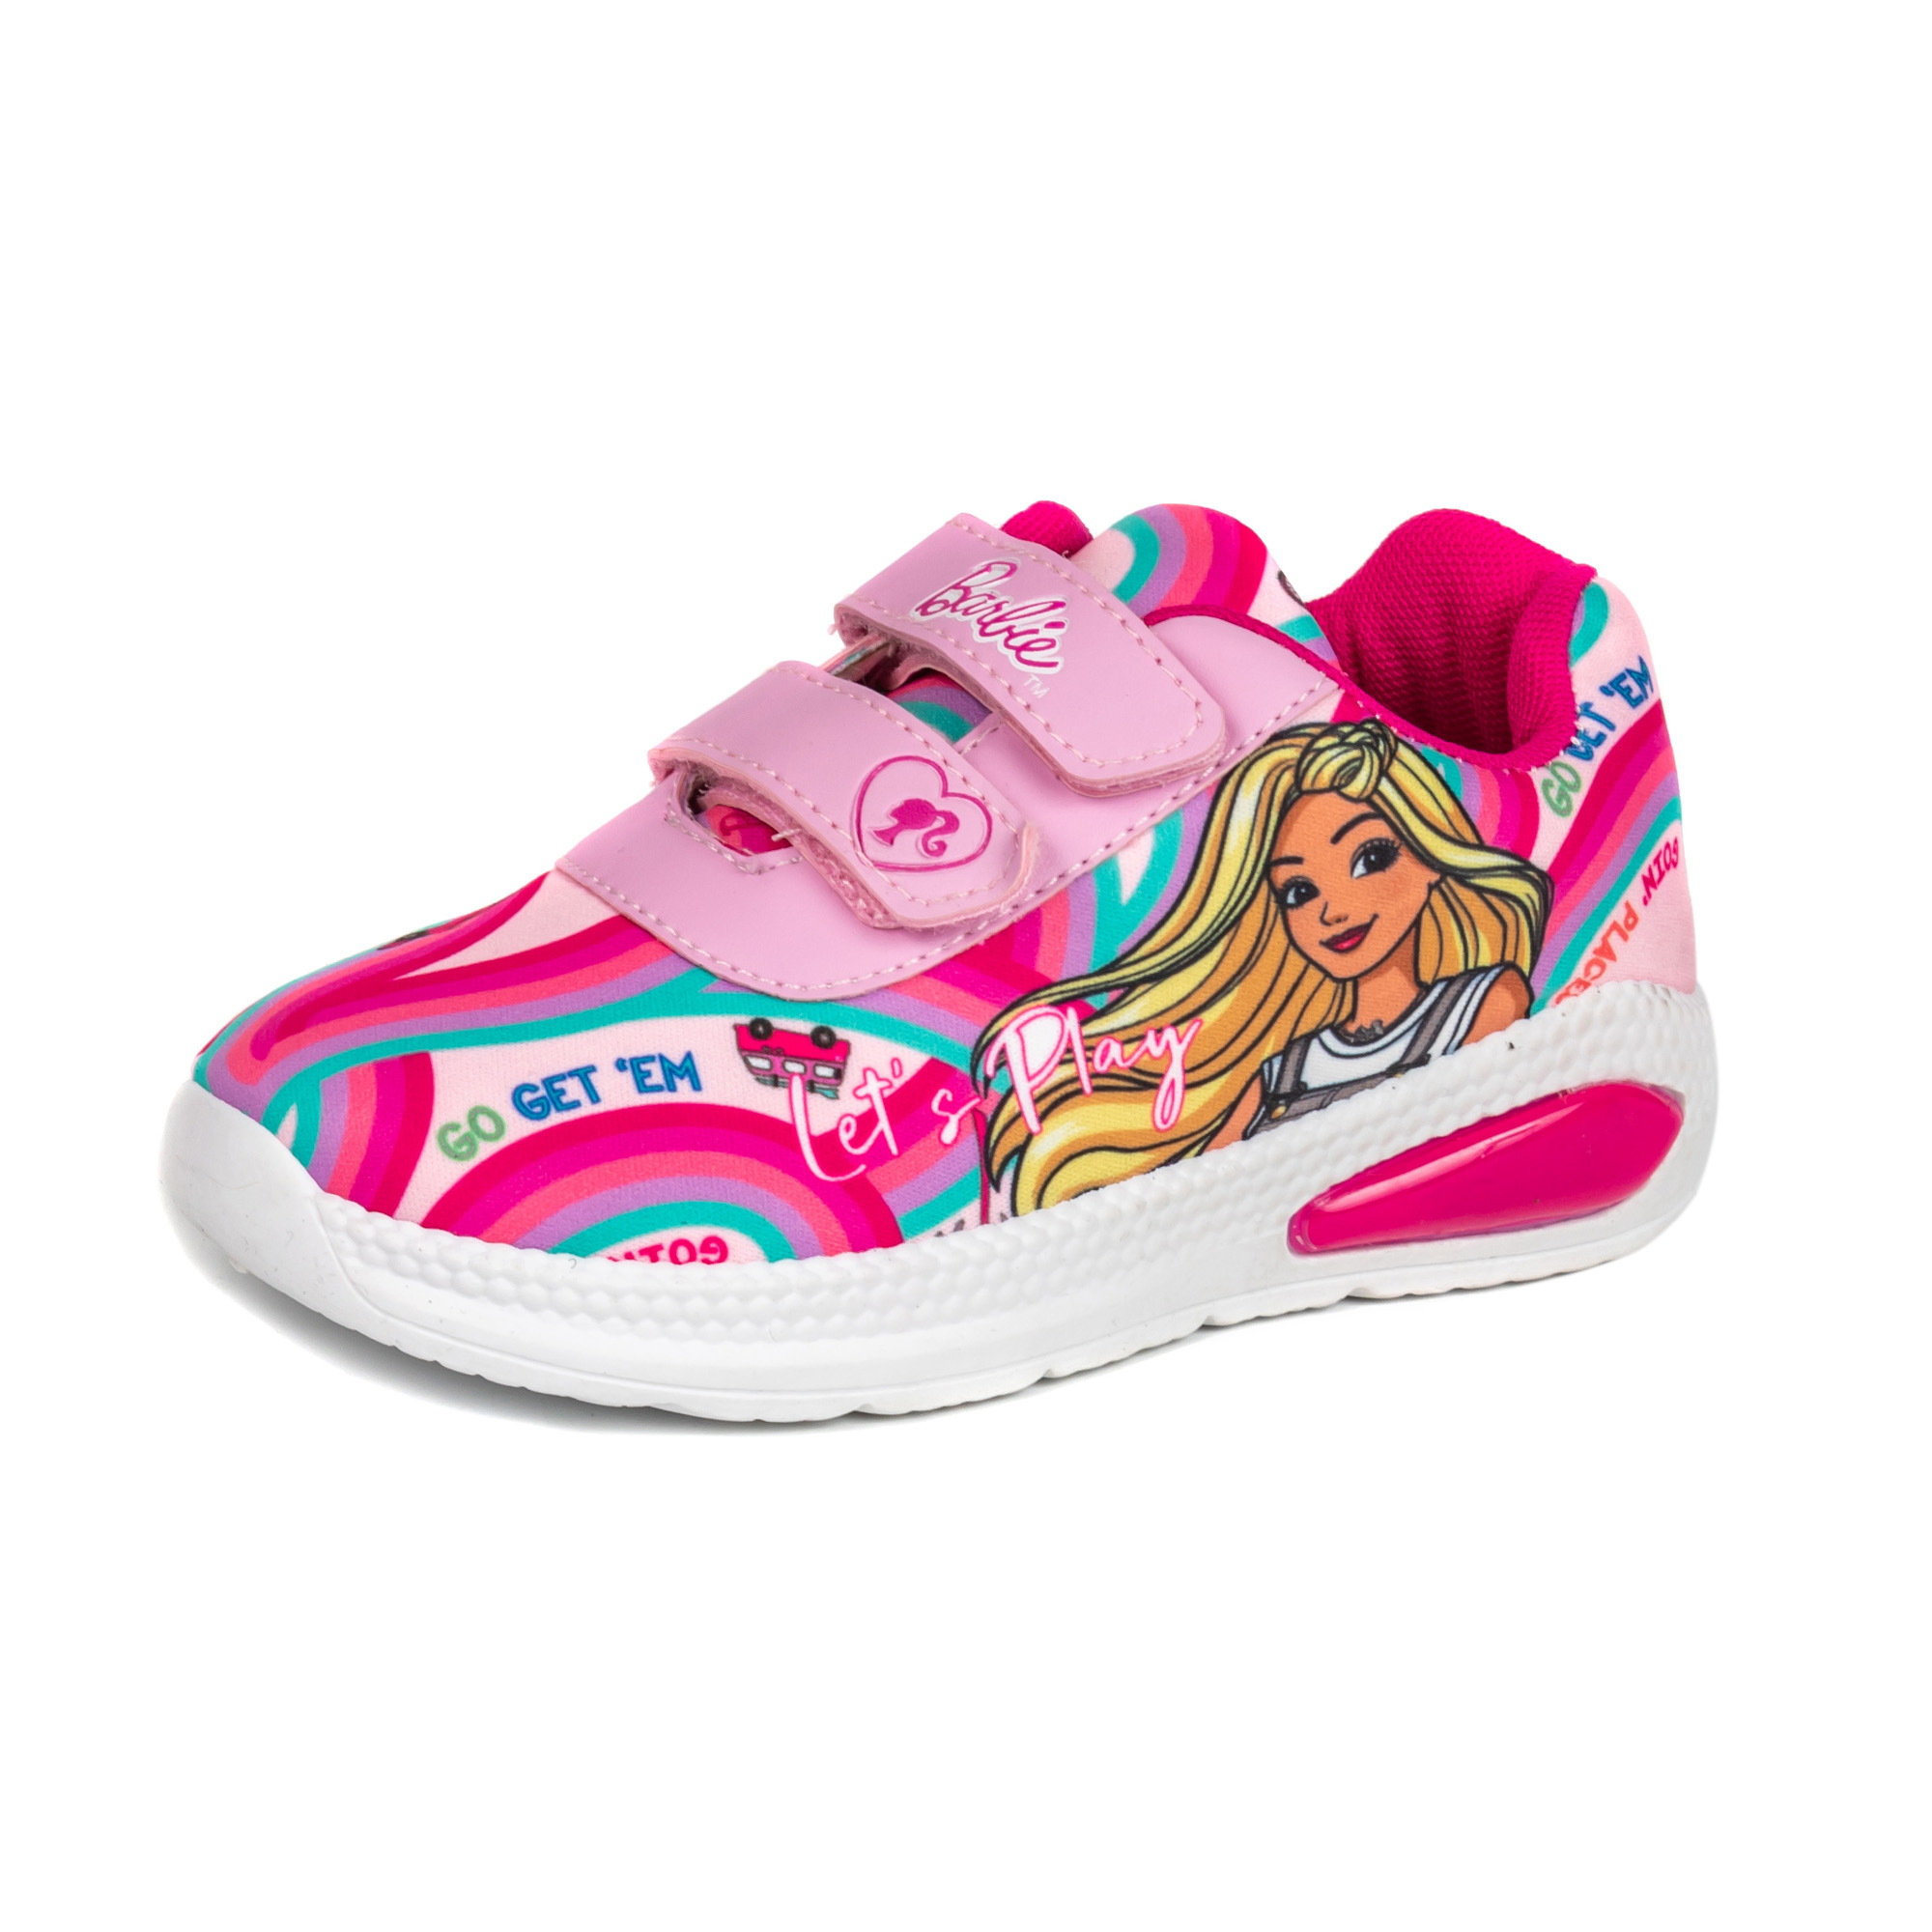 Sneaker Shoes, Children Shoes ,Injection shoes ,Pink/Fuxia Textile with sublimation printing +Pu Upper, PVC injection Outsole